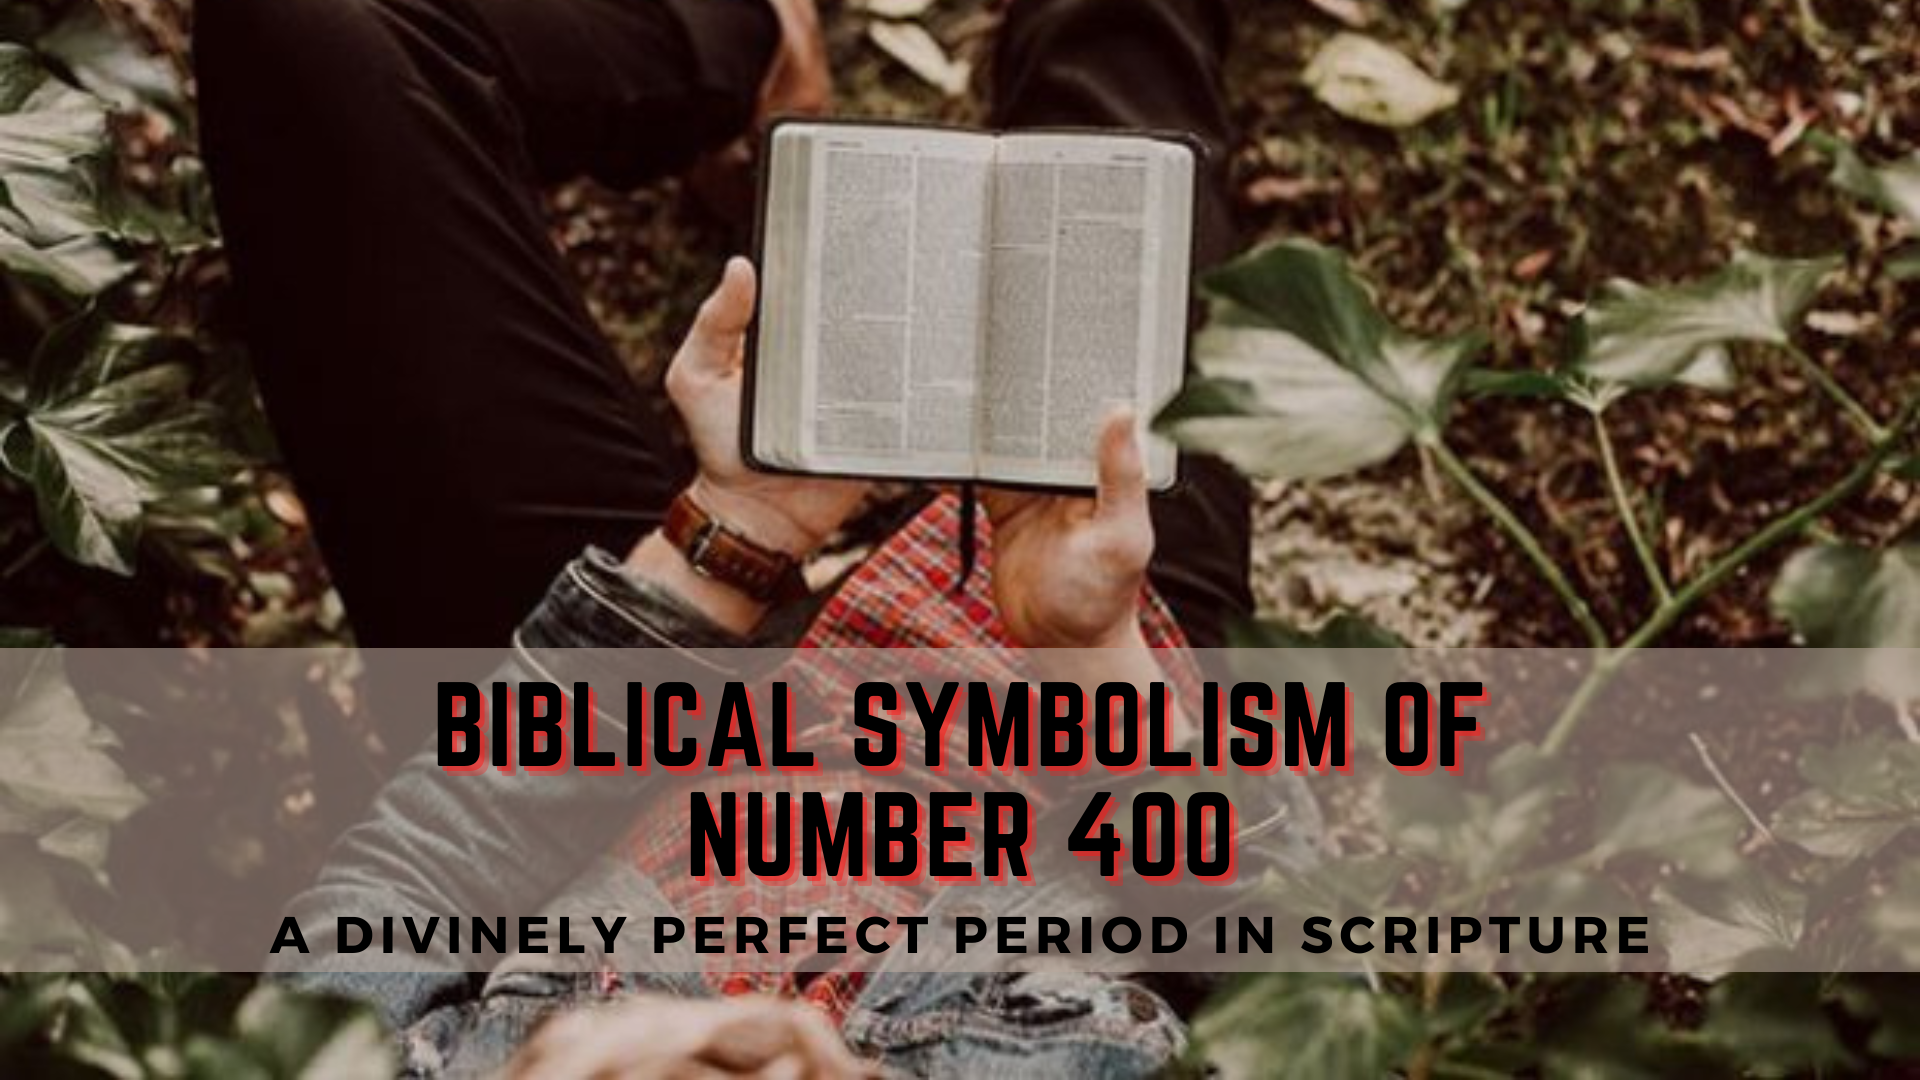 Biblical Symbolism Of Number 400 - A Divinely Perfect Period In Scripture